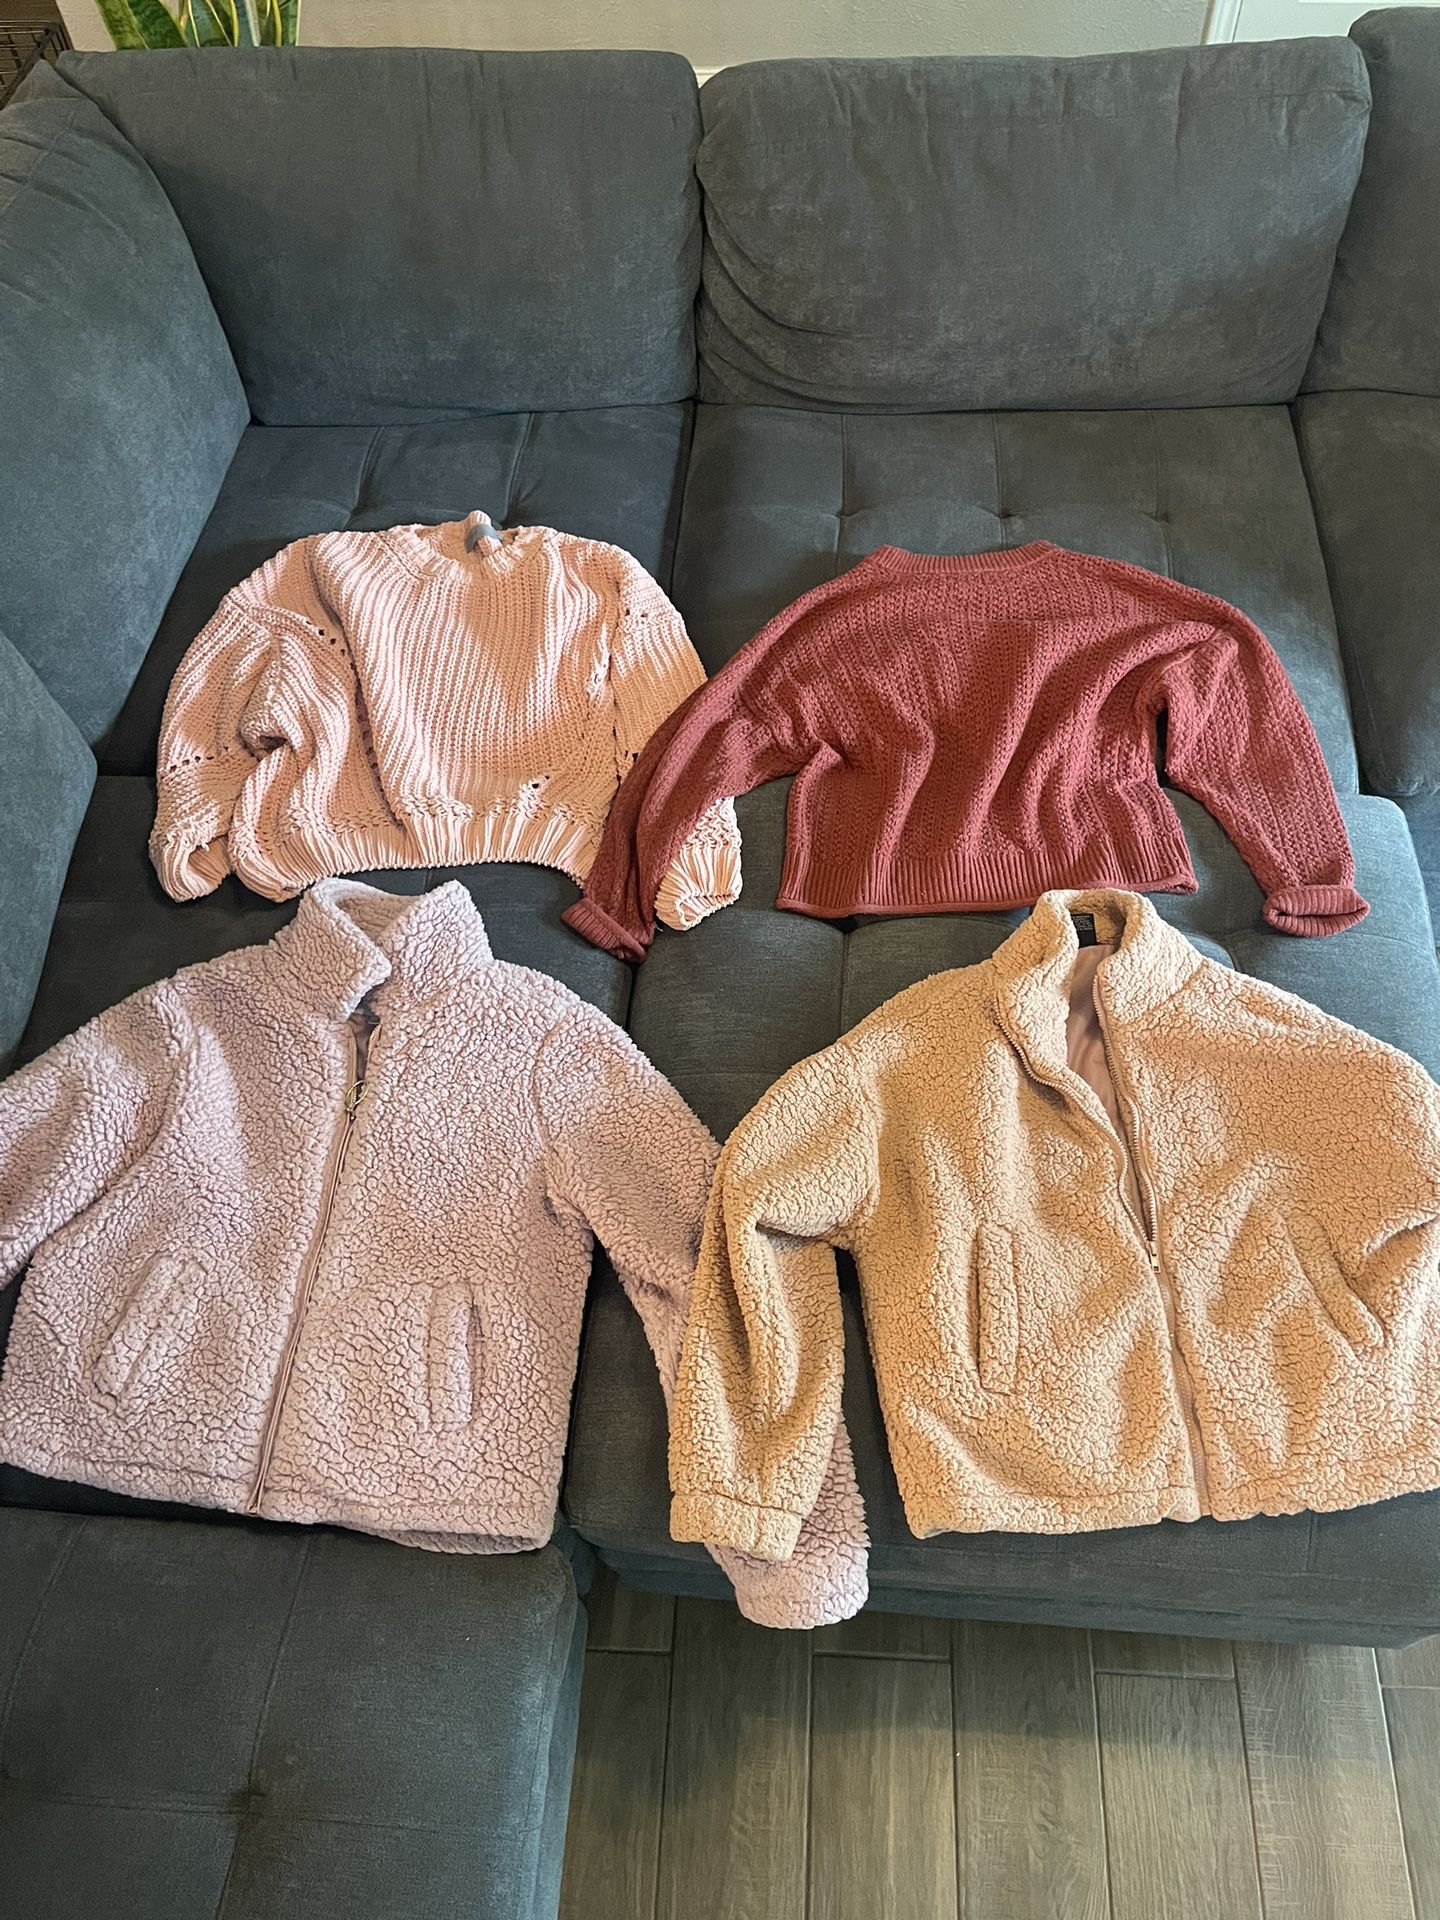 Women’s jackets and sweaters size medium (smoke free and animal free home) $45 for all/OBO